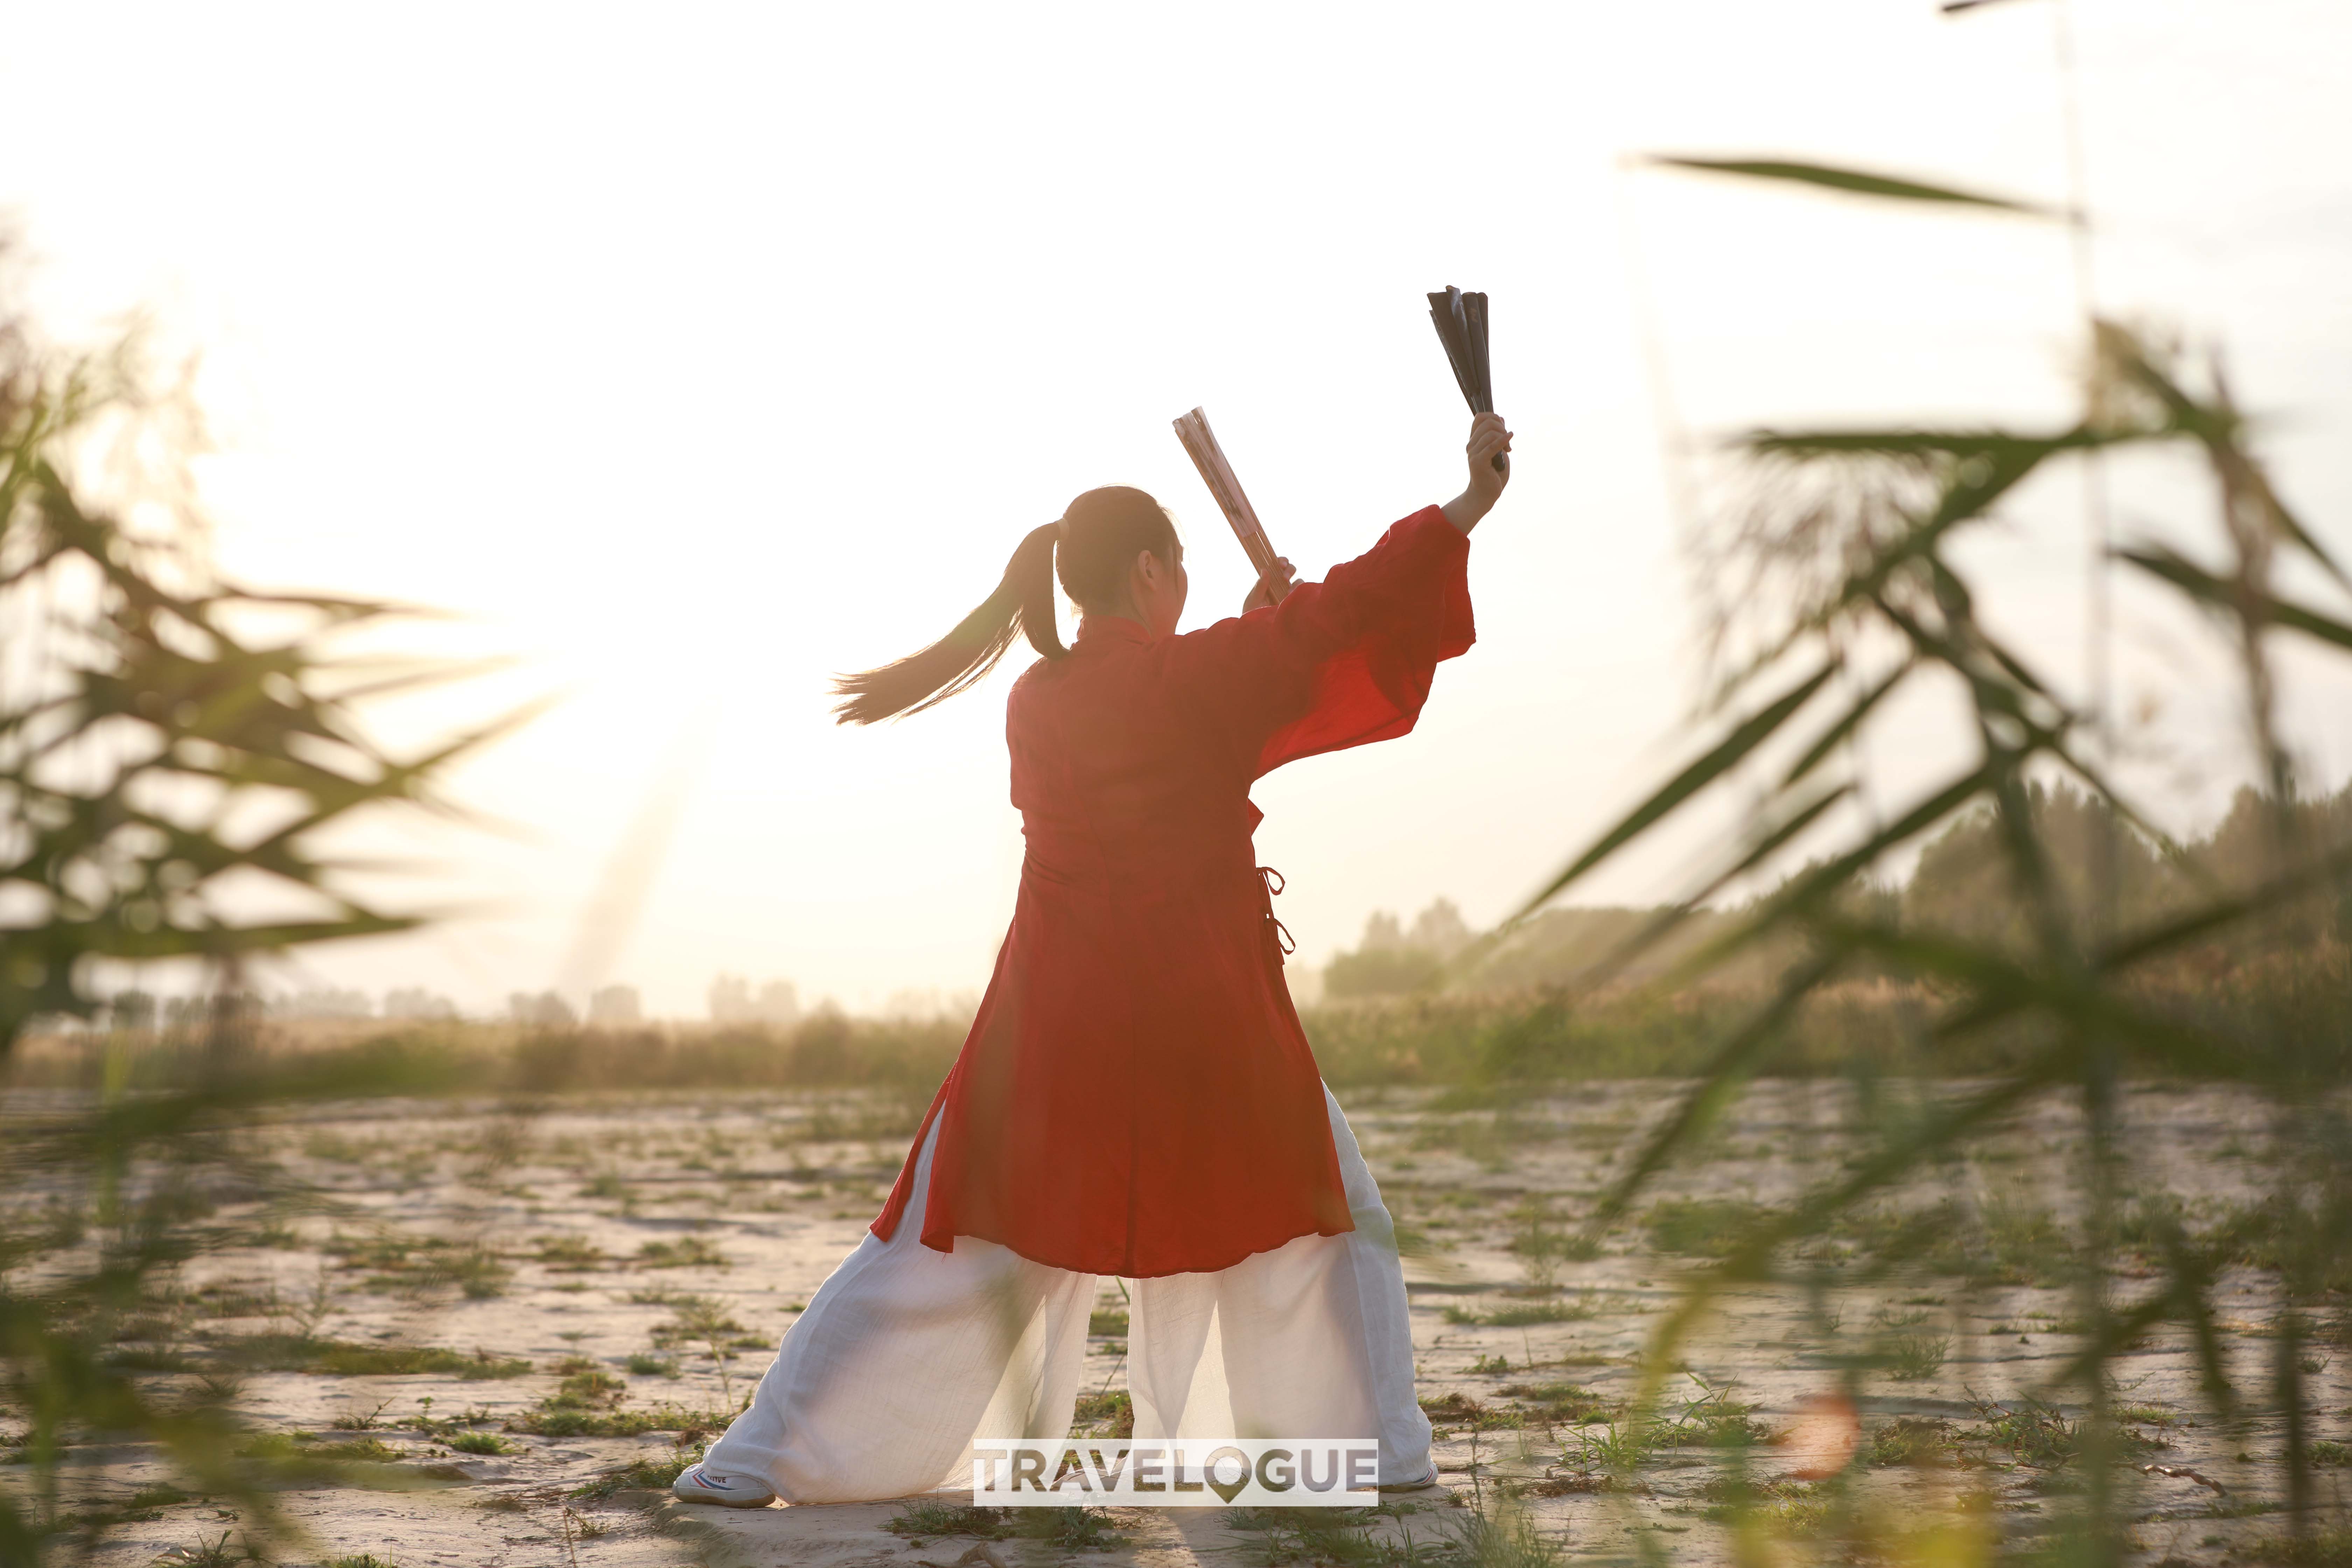 People believe that Tai Chi is a reflection of one's inner-self. They also believe they can learn to cultivate self-awareness and self-mastery through practicing Tai Chi. /CGTN